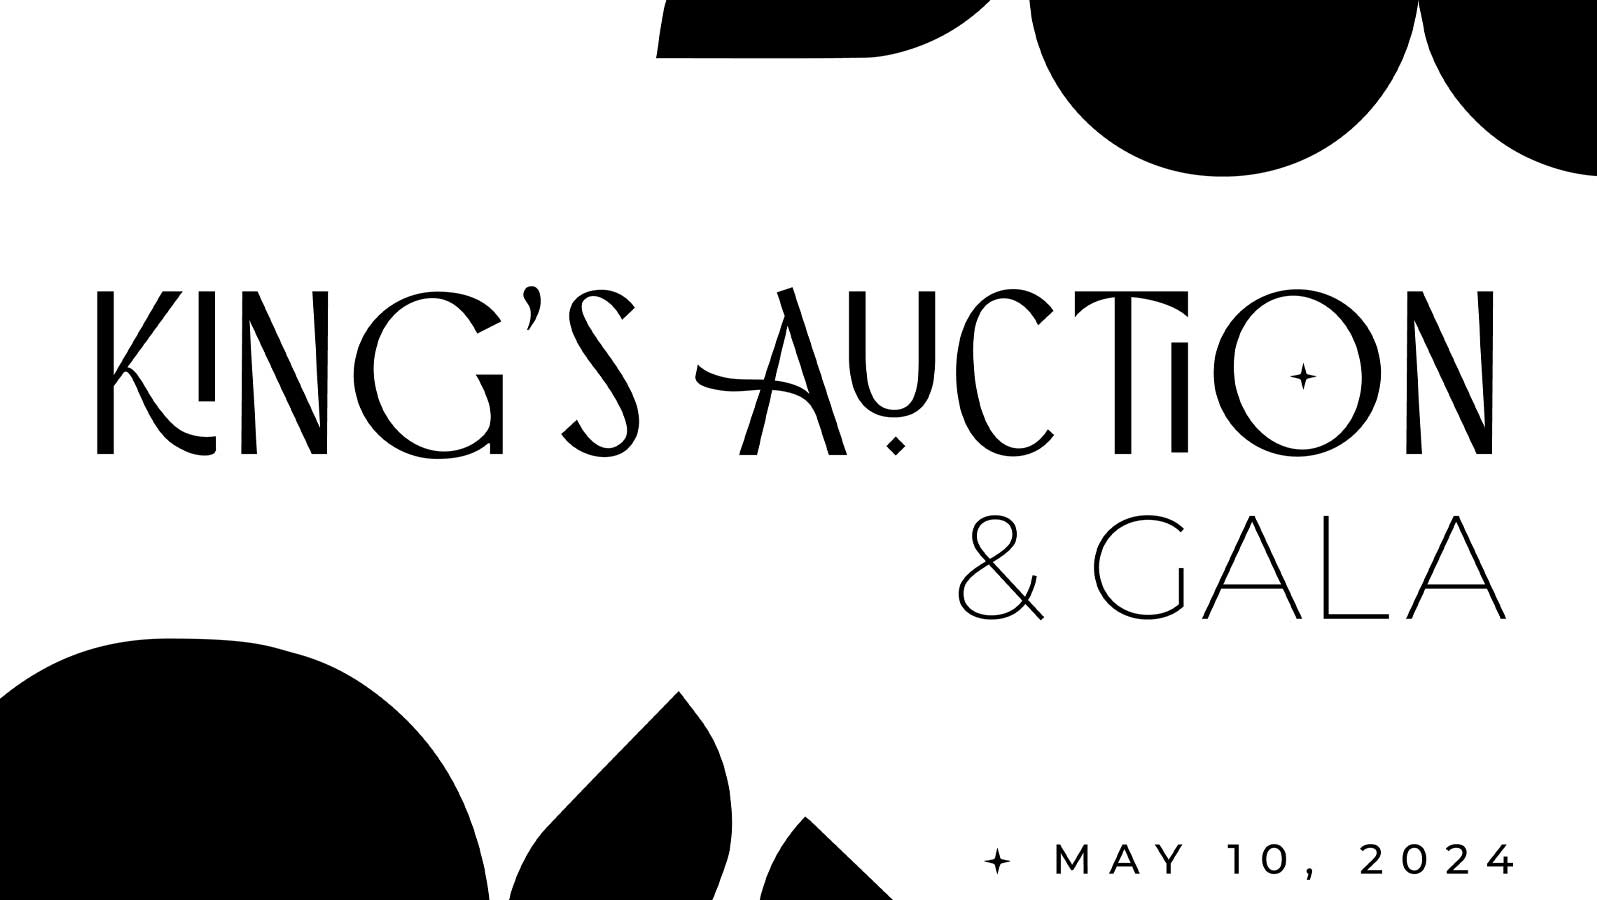 CRISTA Ministries King's Auction and Gala logo